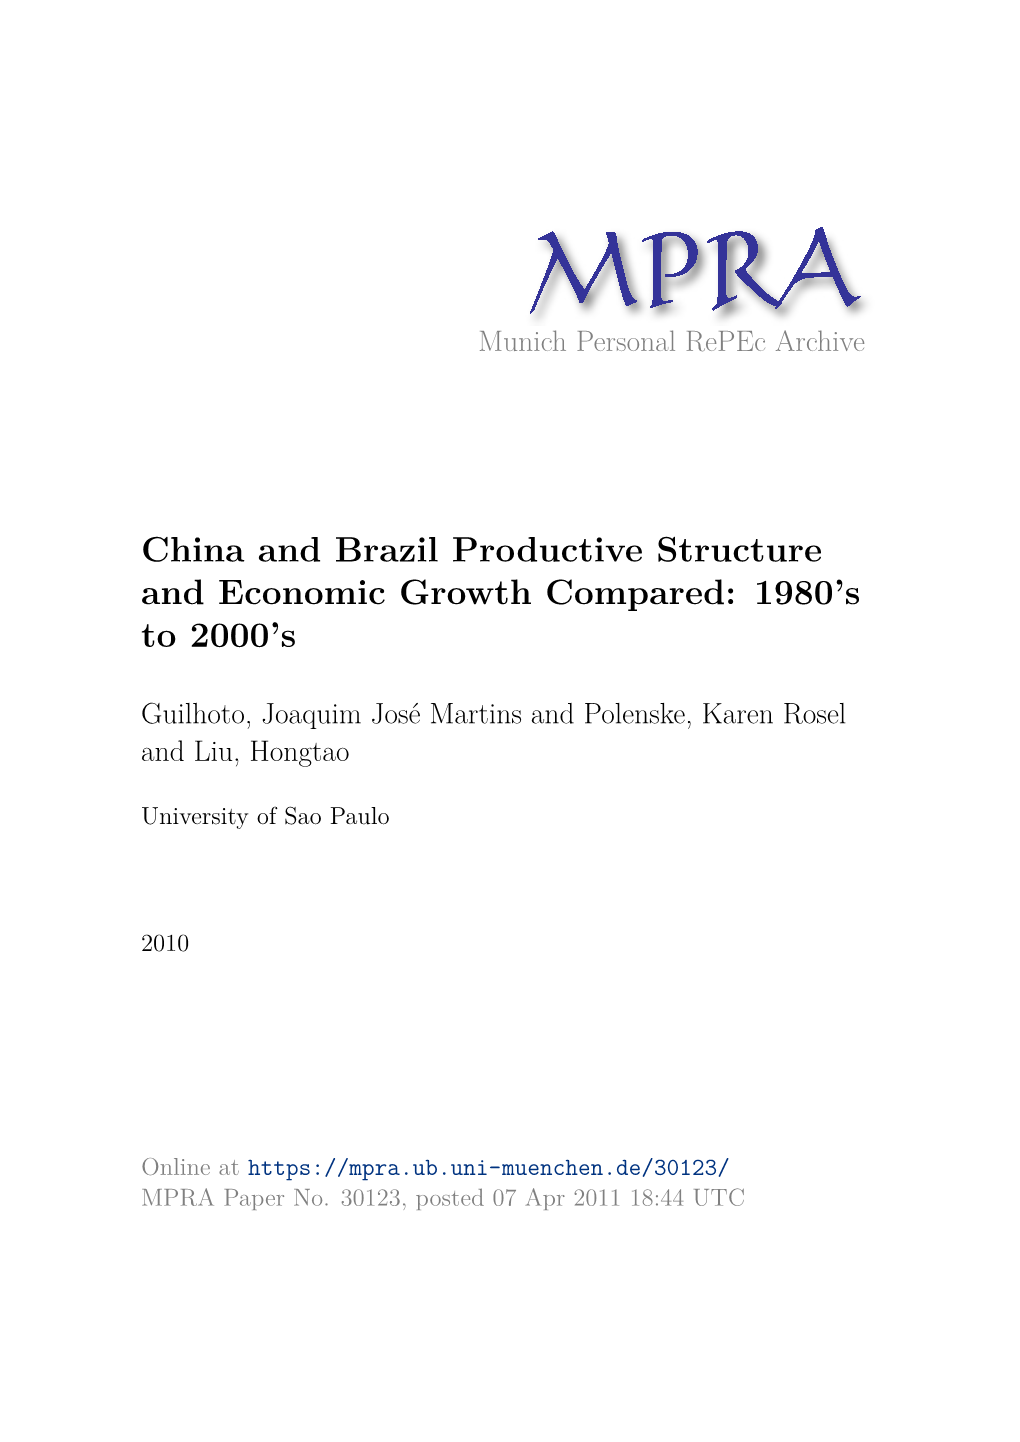 China and Brazil Productive Structure and Economic Growth Compared: 1980’S to 2000’S